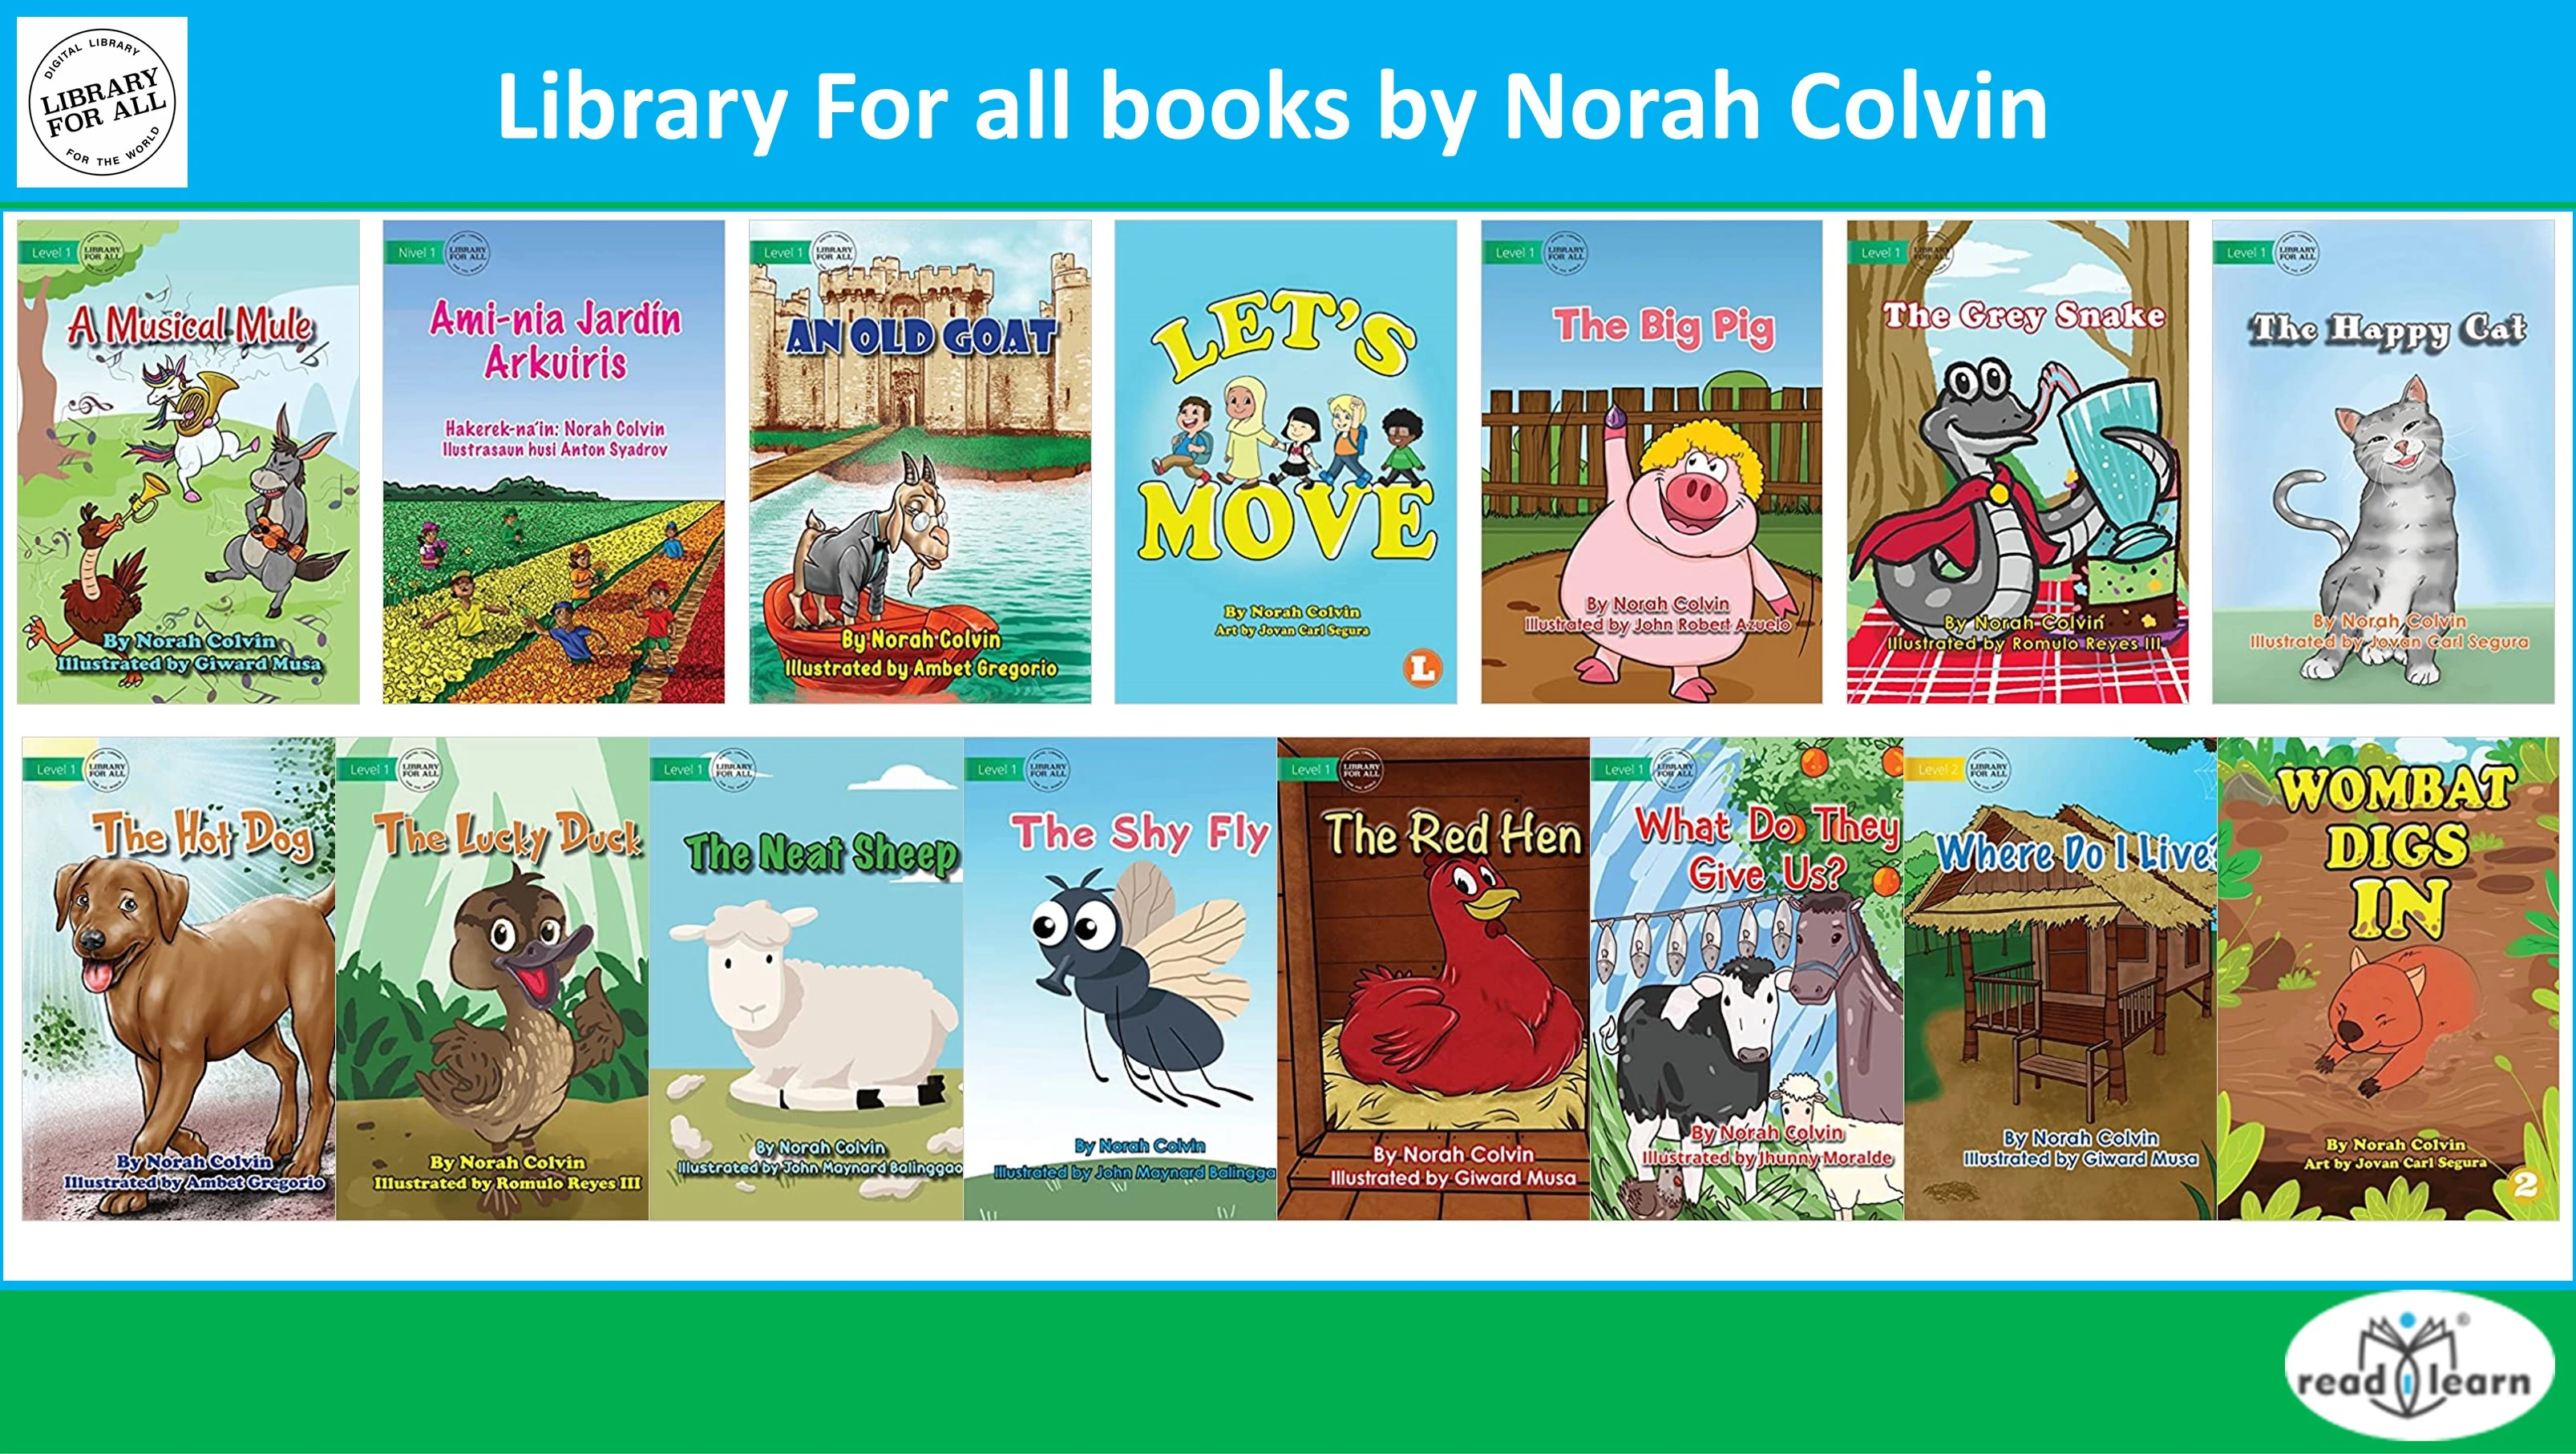 Library For All books by Norah Colvin